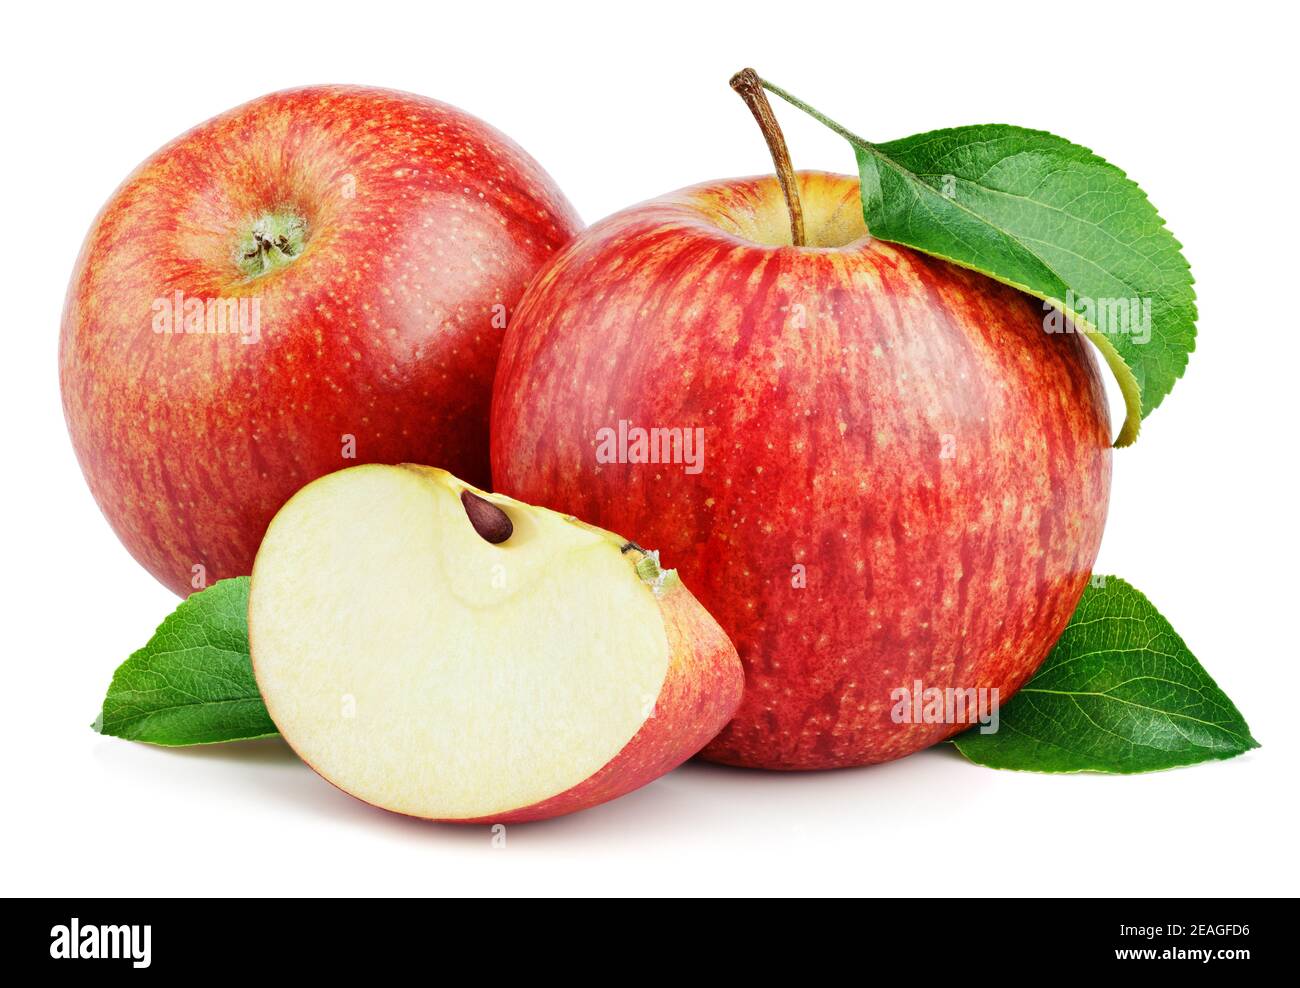 Ripe red apple fruits with apple slice and apple green leaves isolated on white background. Red apples and leaves with clipping path Stock Photo